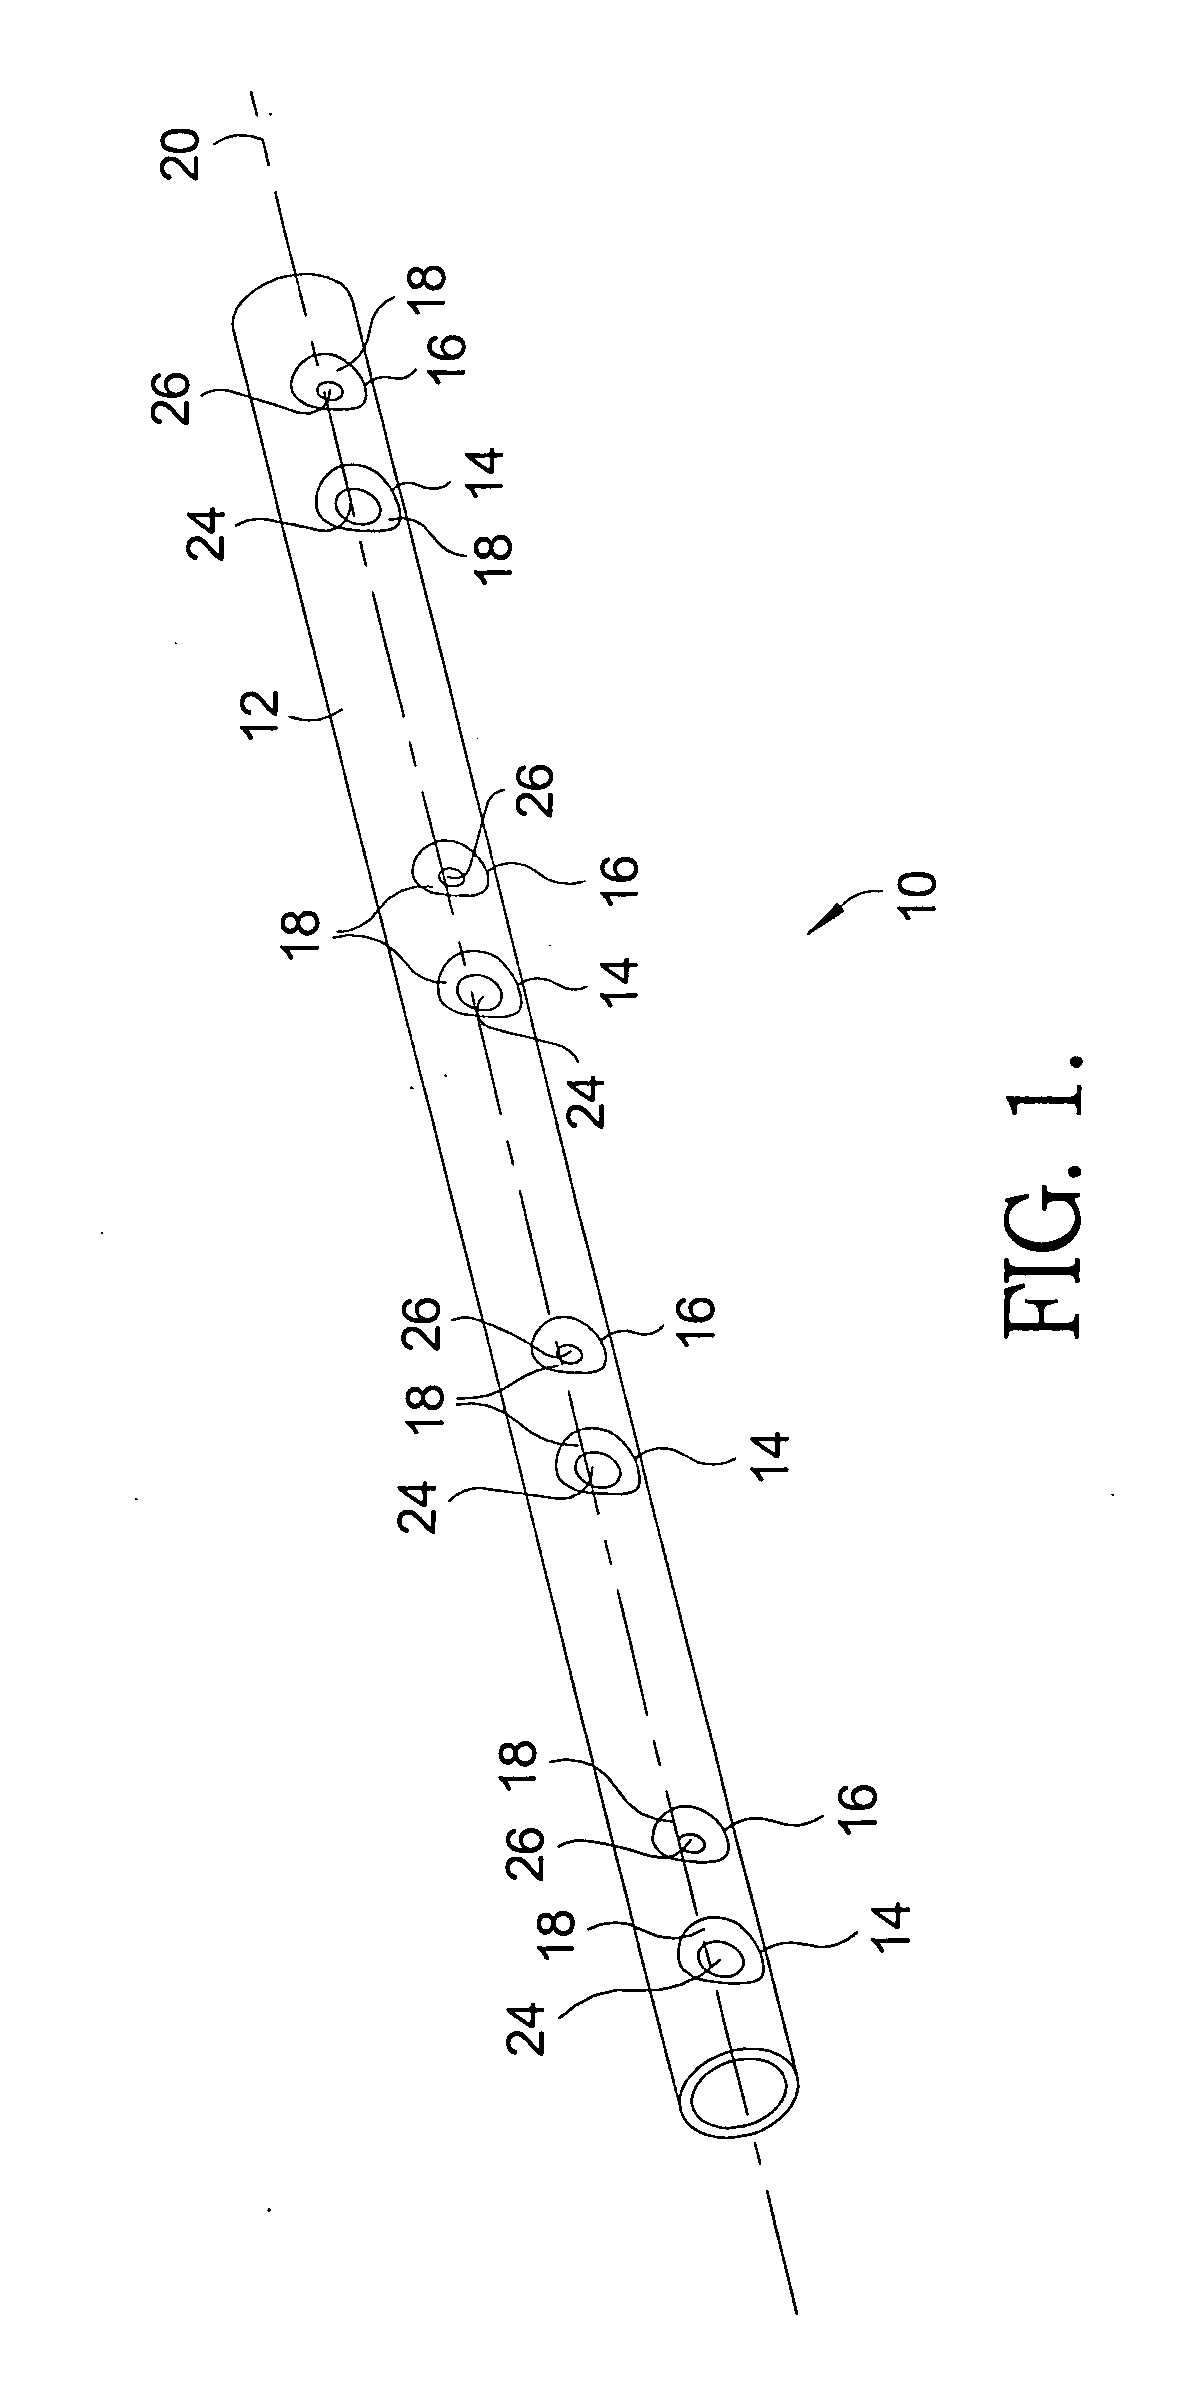 Fuel distribution tube for direct injection fuel rail assemblies